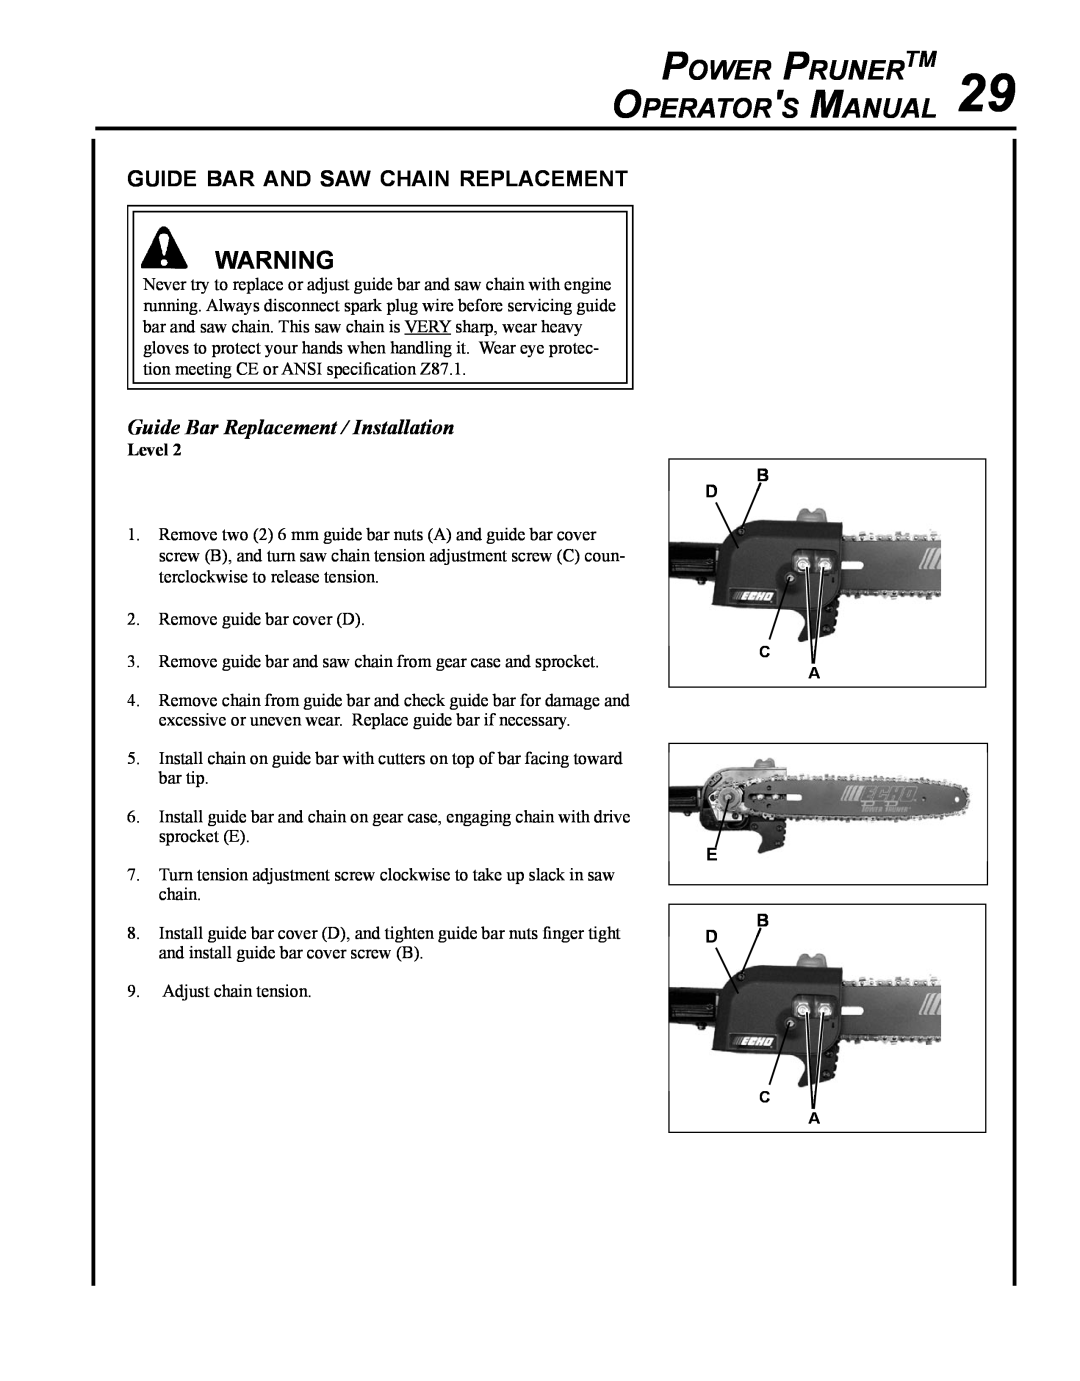 Echo PPT-265H manual Power PrunerTM 29 Operators Manual, guide bar and saw chain replacement 